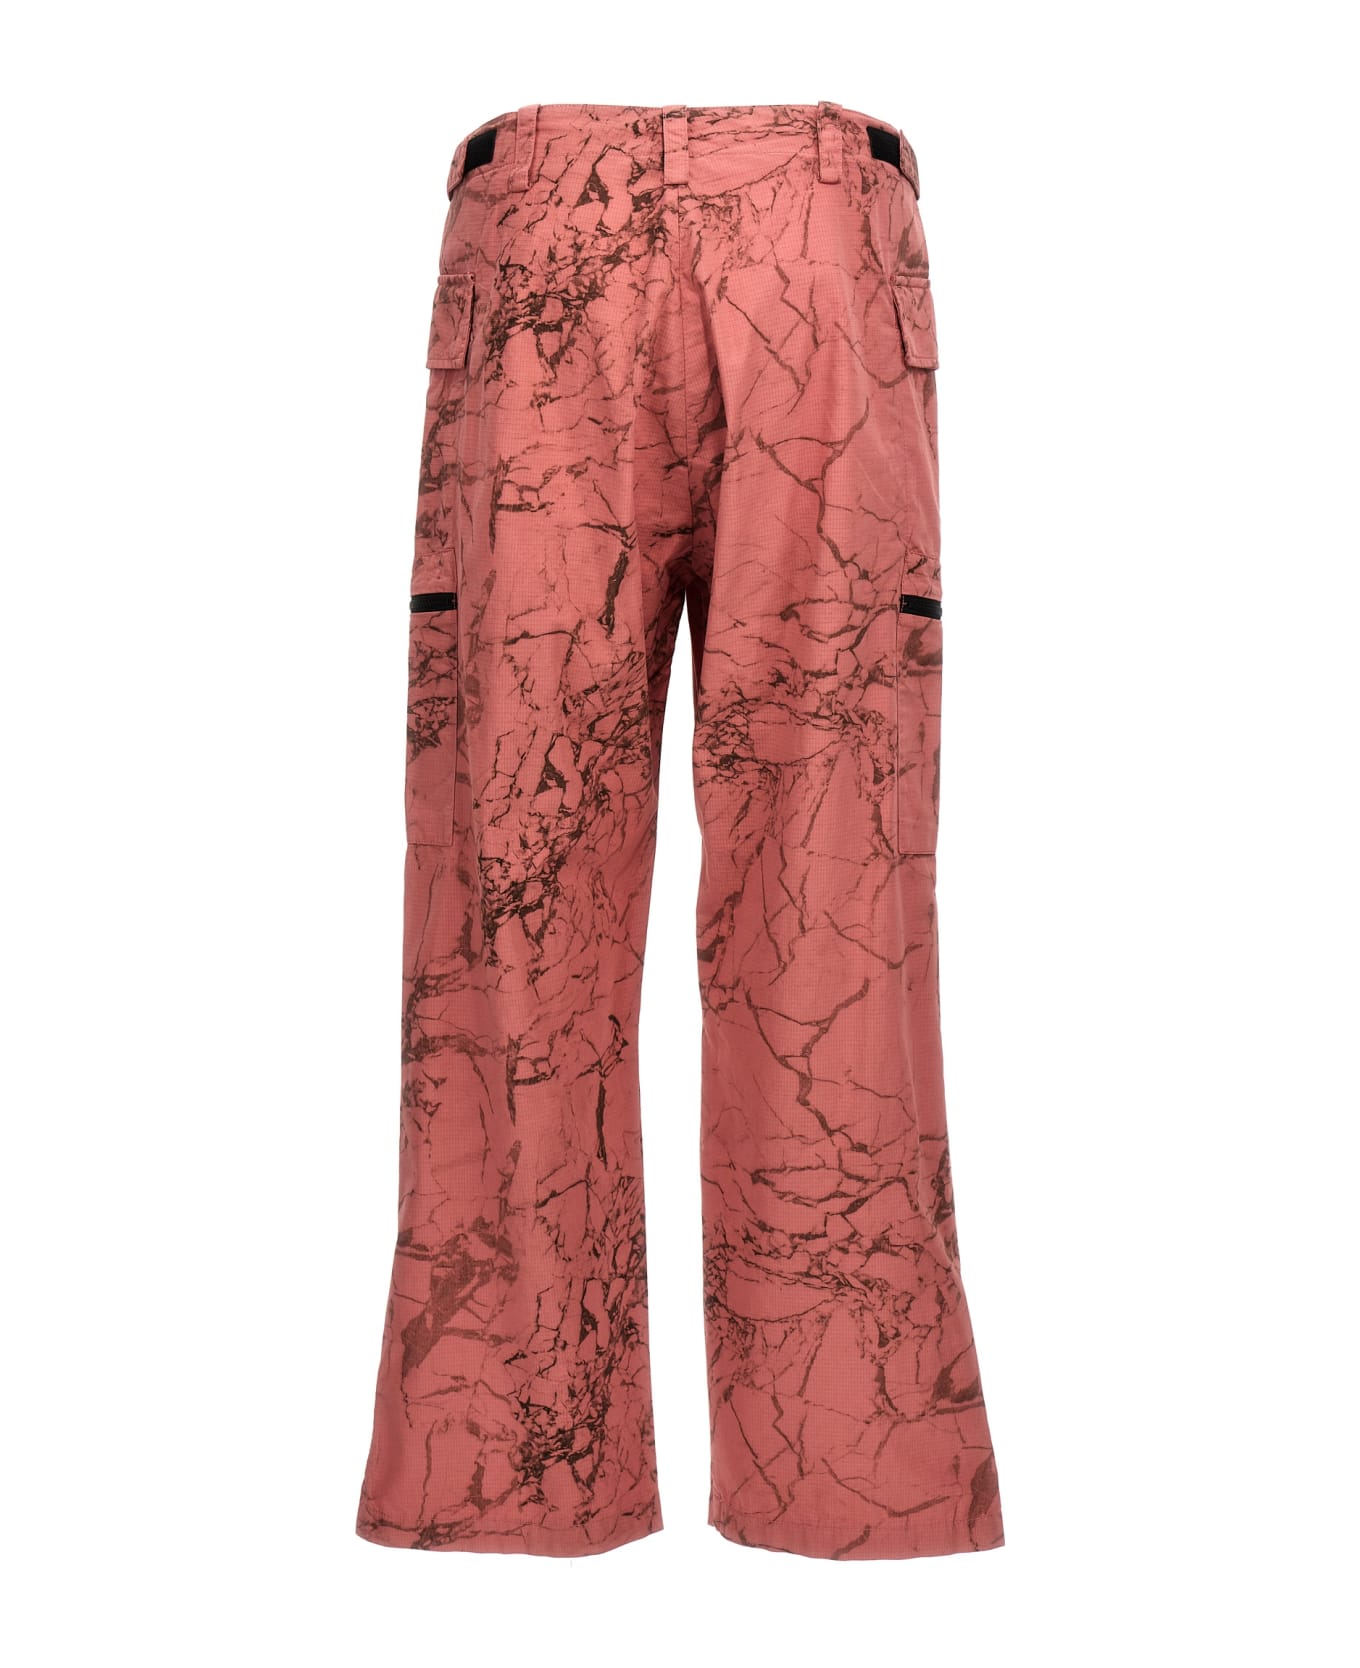 A-COLD-WALL 'crimson Overdye Static Zip' Pants - Pink ボトムス